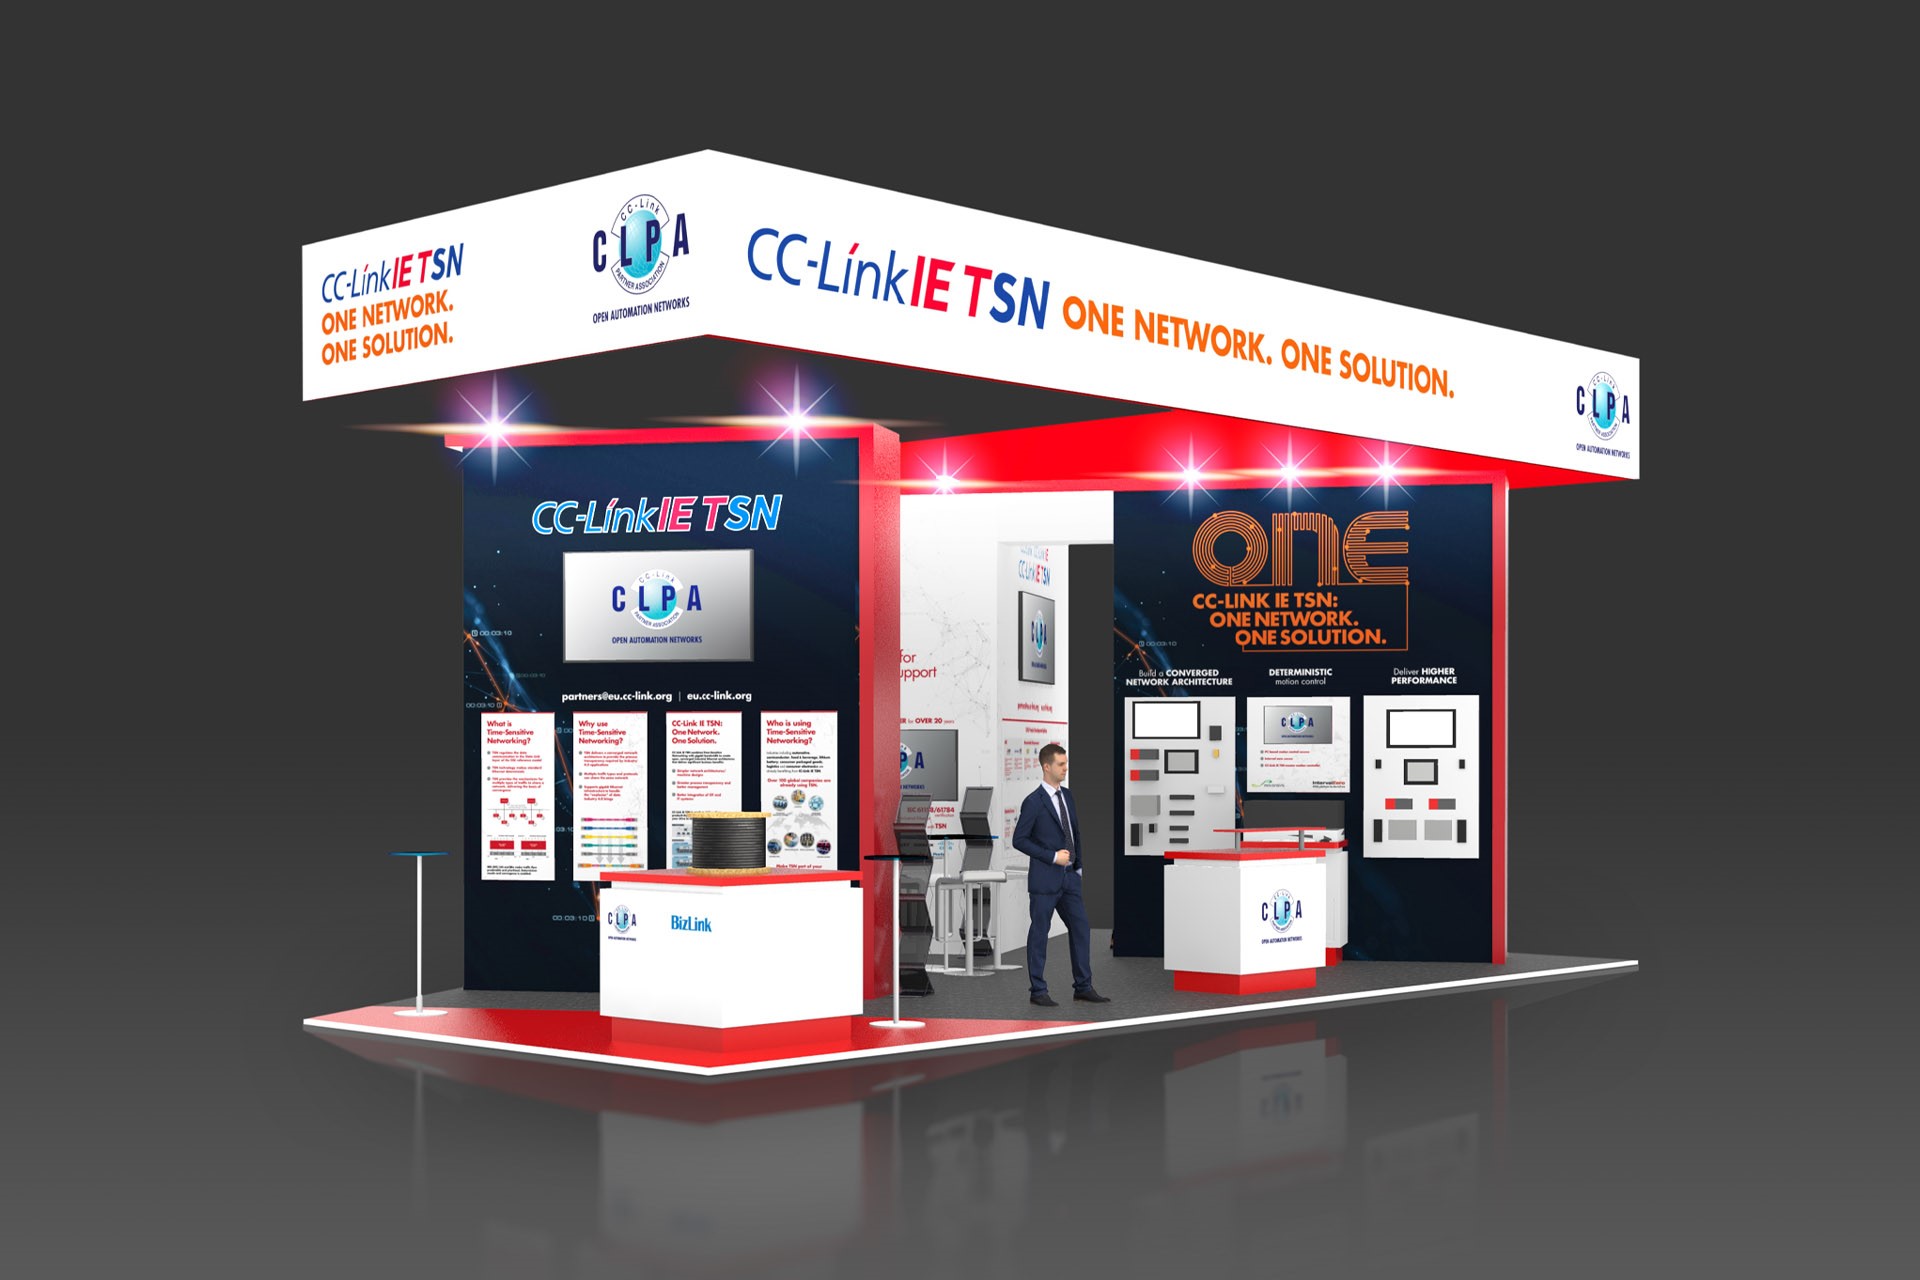 Visit the CLPA on Stand 108, Hall 5 at SPS 2023, from 14th-16th November 2023, at Nürnberg Messe, Nuremberg, Germany.